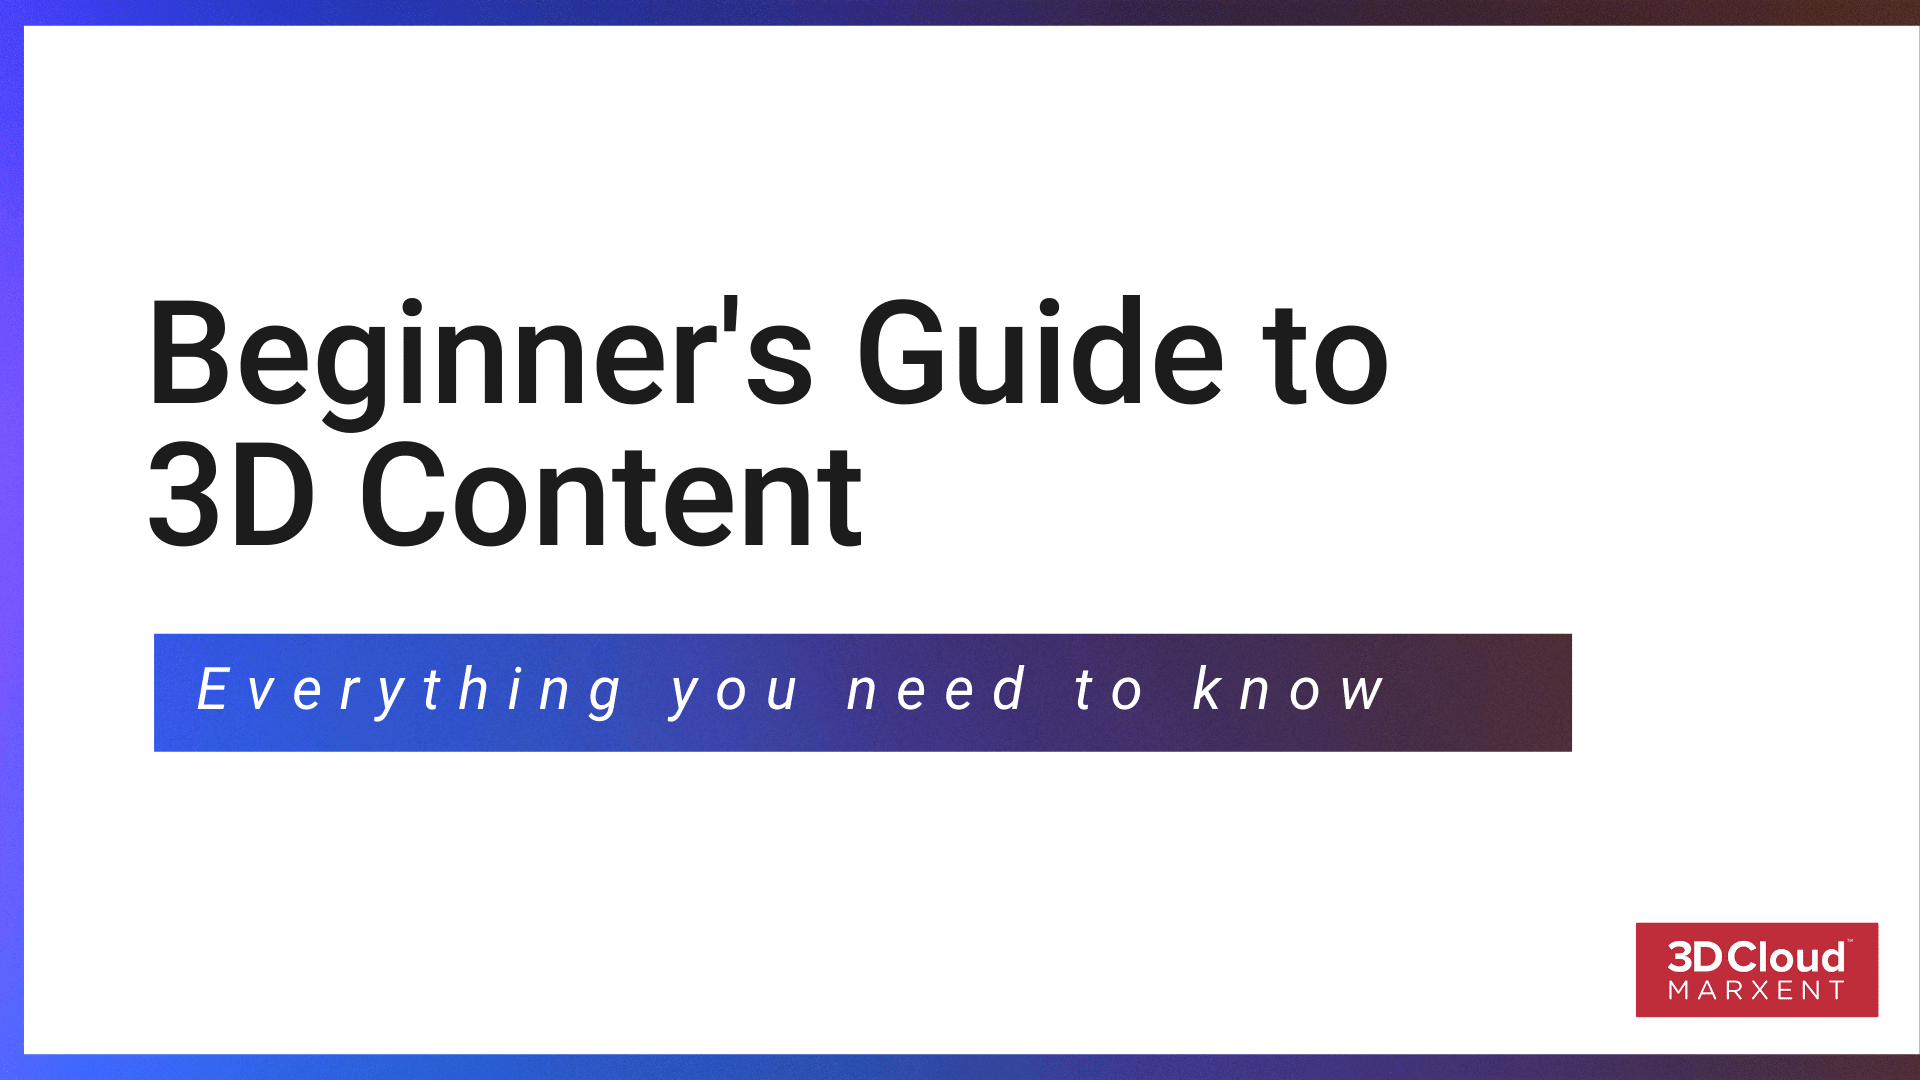 Beginner's Guide to 3D Content